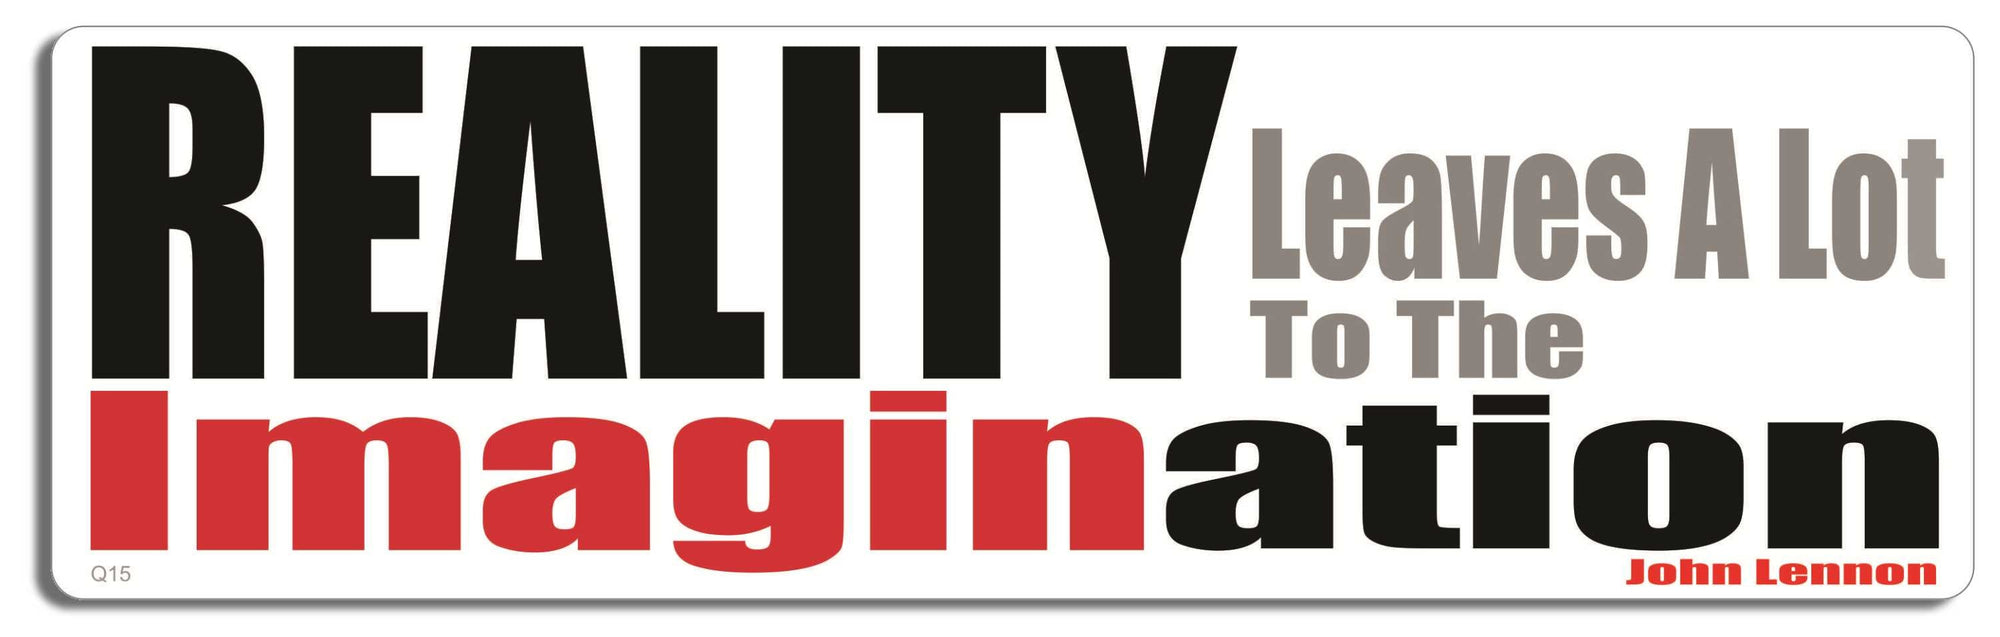 Reality leaves a lot to the imagination - John Lennon - 3" x 10" Bumper Sticker--Car Magnet- -  Decal quotation Bumper Sticker Car Magnet Reality leaves a lot to the imagination-  Decal for cars music, quotation, quote